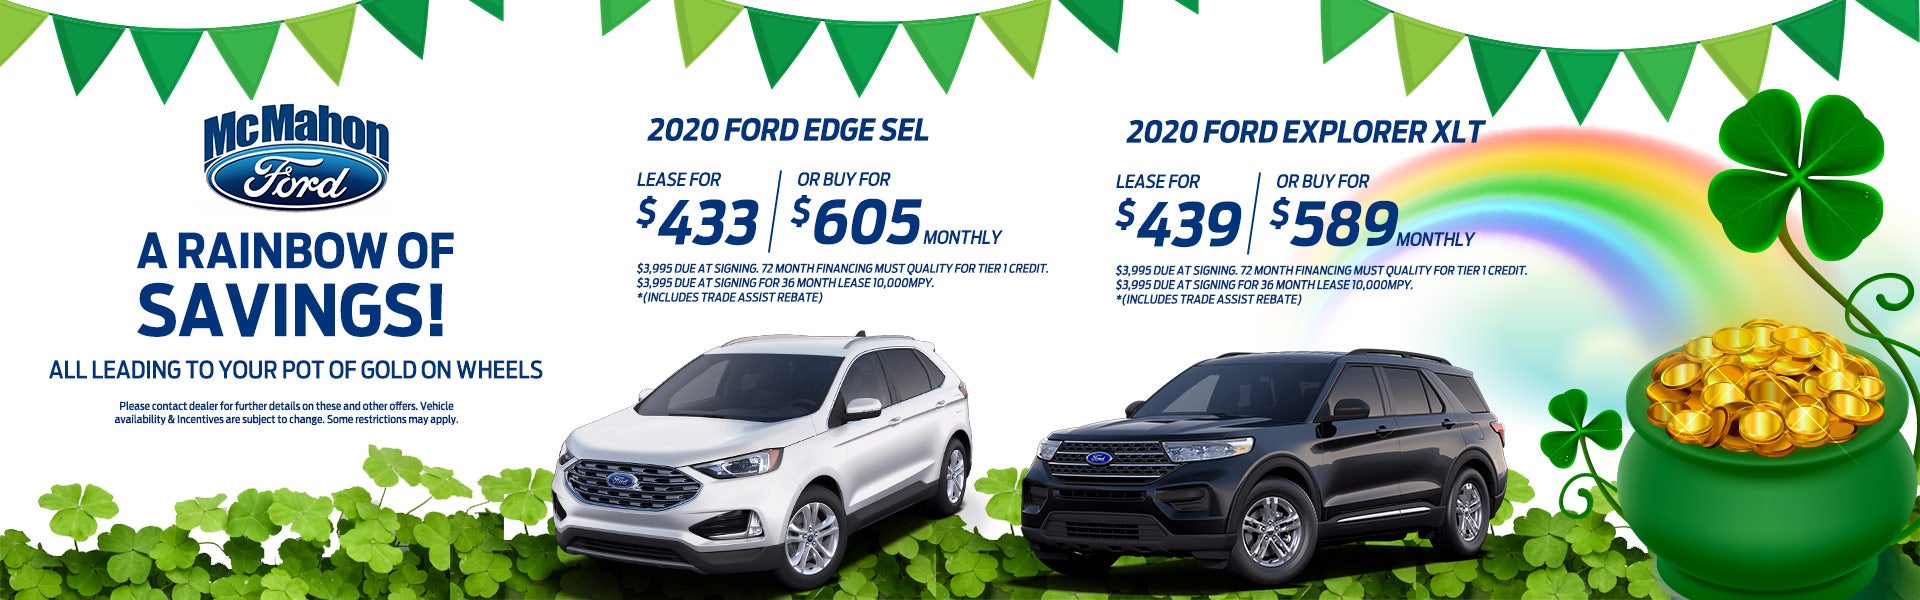 2020 Ford Edge & 2020 Ford Explorer Special at McMahon Ford